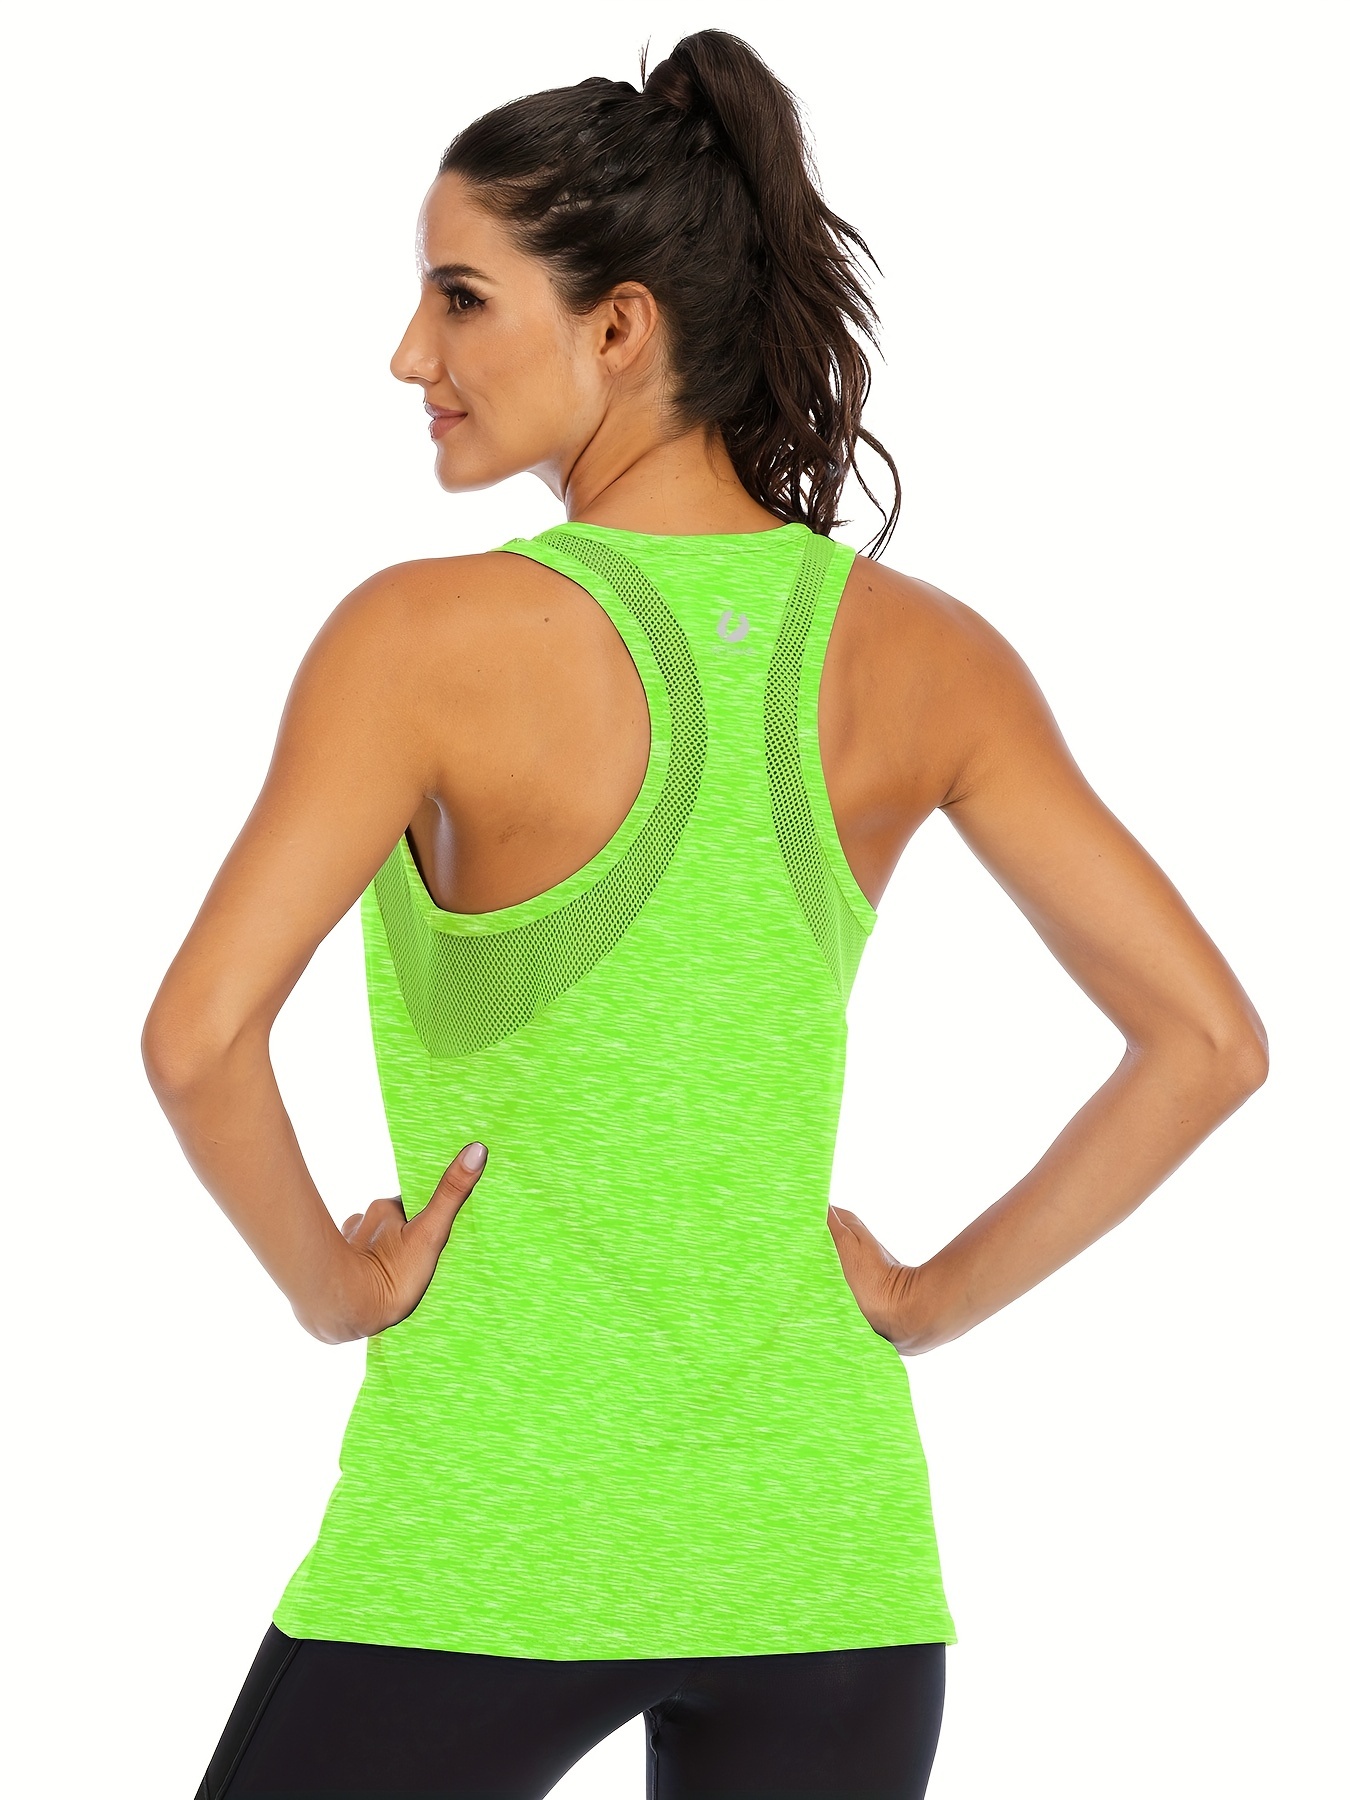 NEW Girls All in Motion Activewear Tank Top Green  Activewear tank tops,  Clothes design, Outfit inspo